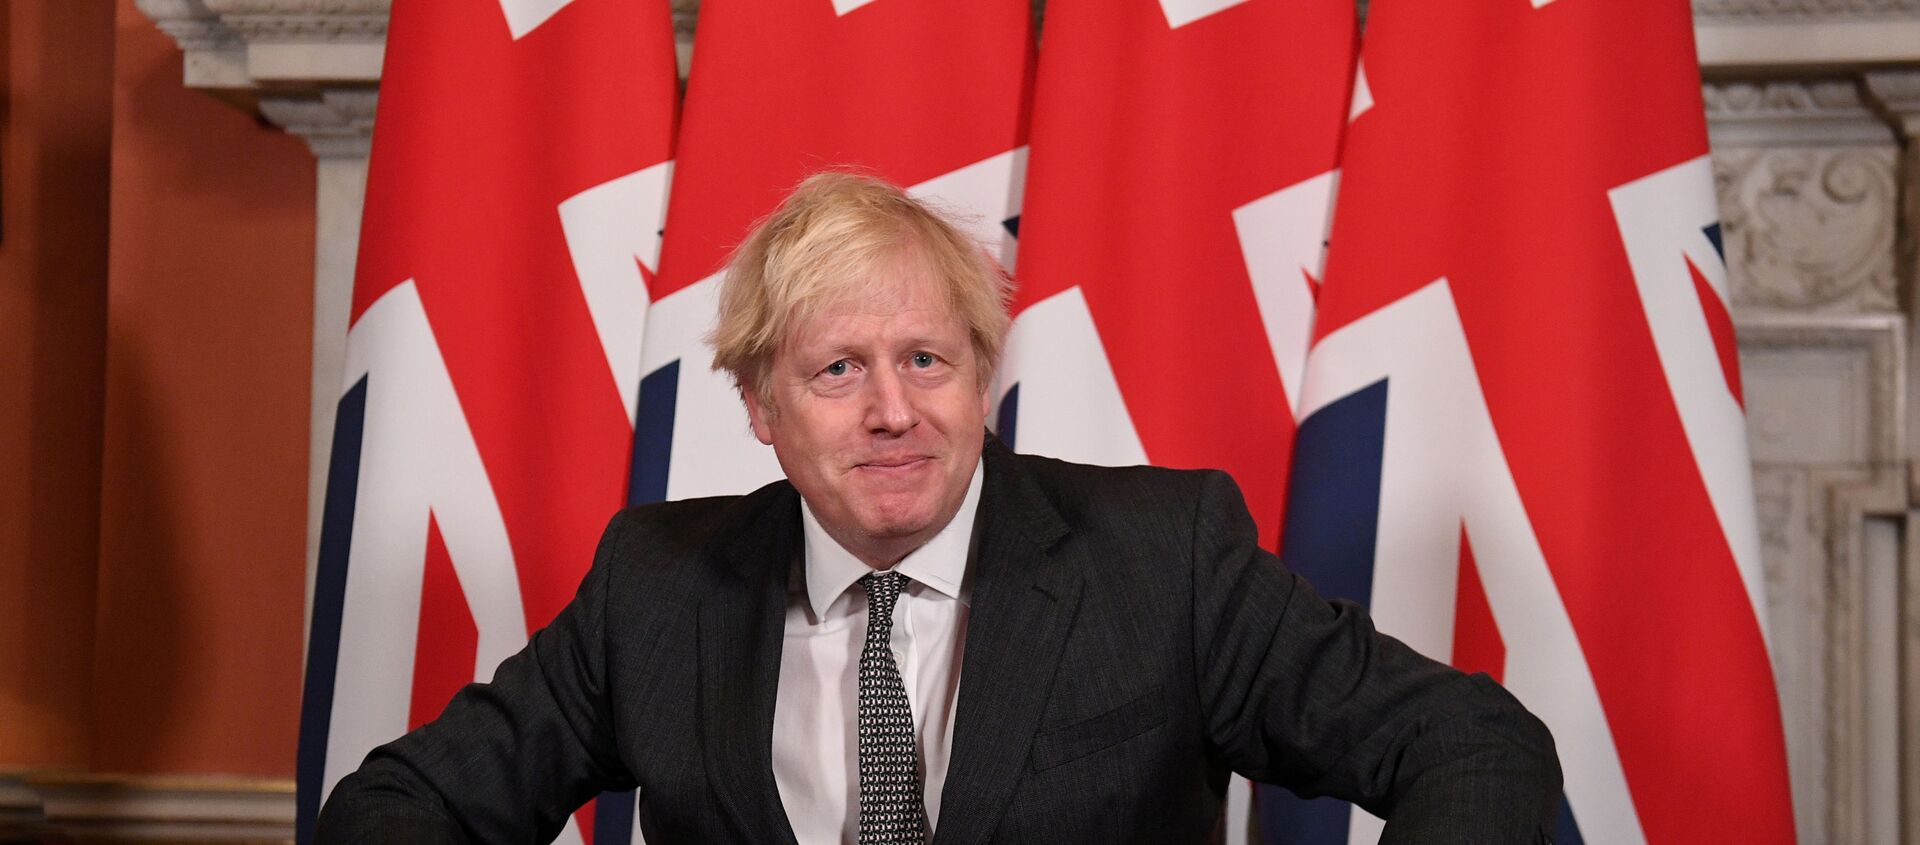 Britain's Prime Minister Boris Johnson reacts after signing the Brexit trade deal with the EU - Sputnik International, 1920, 08.02.2021